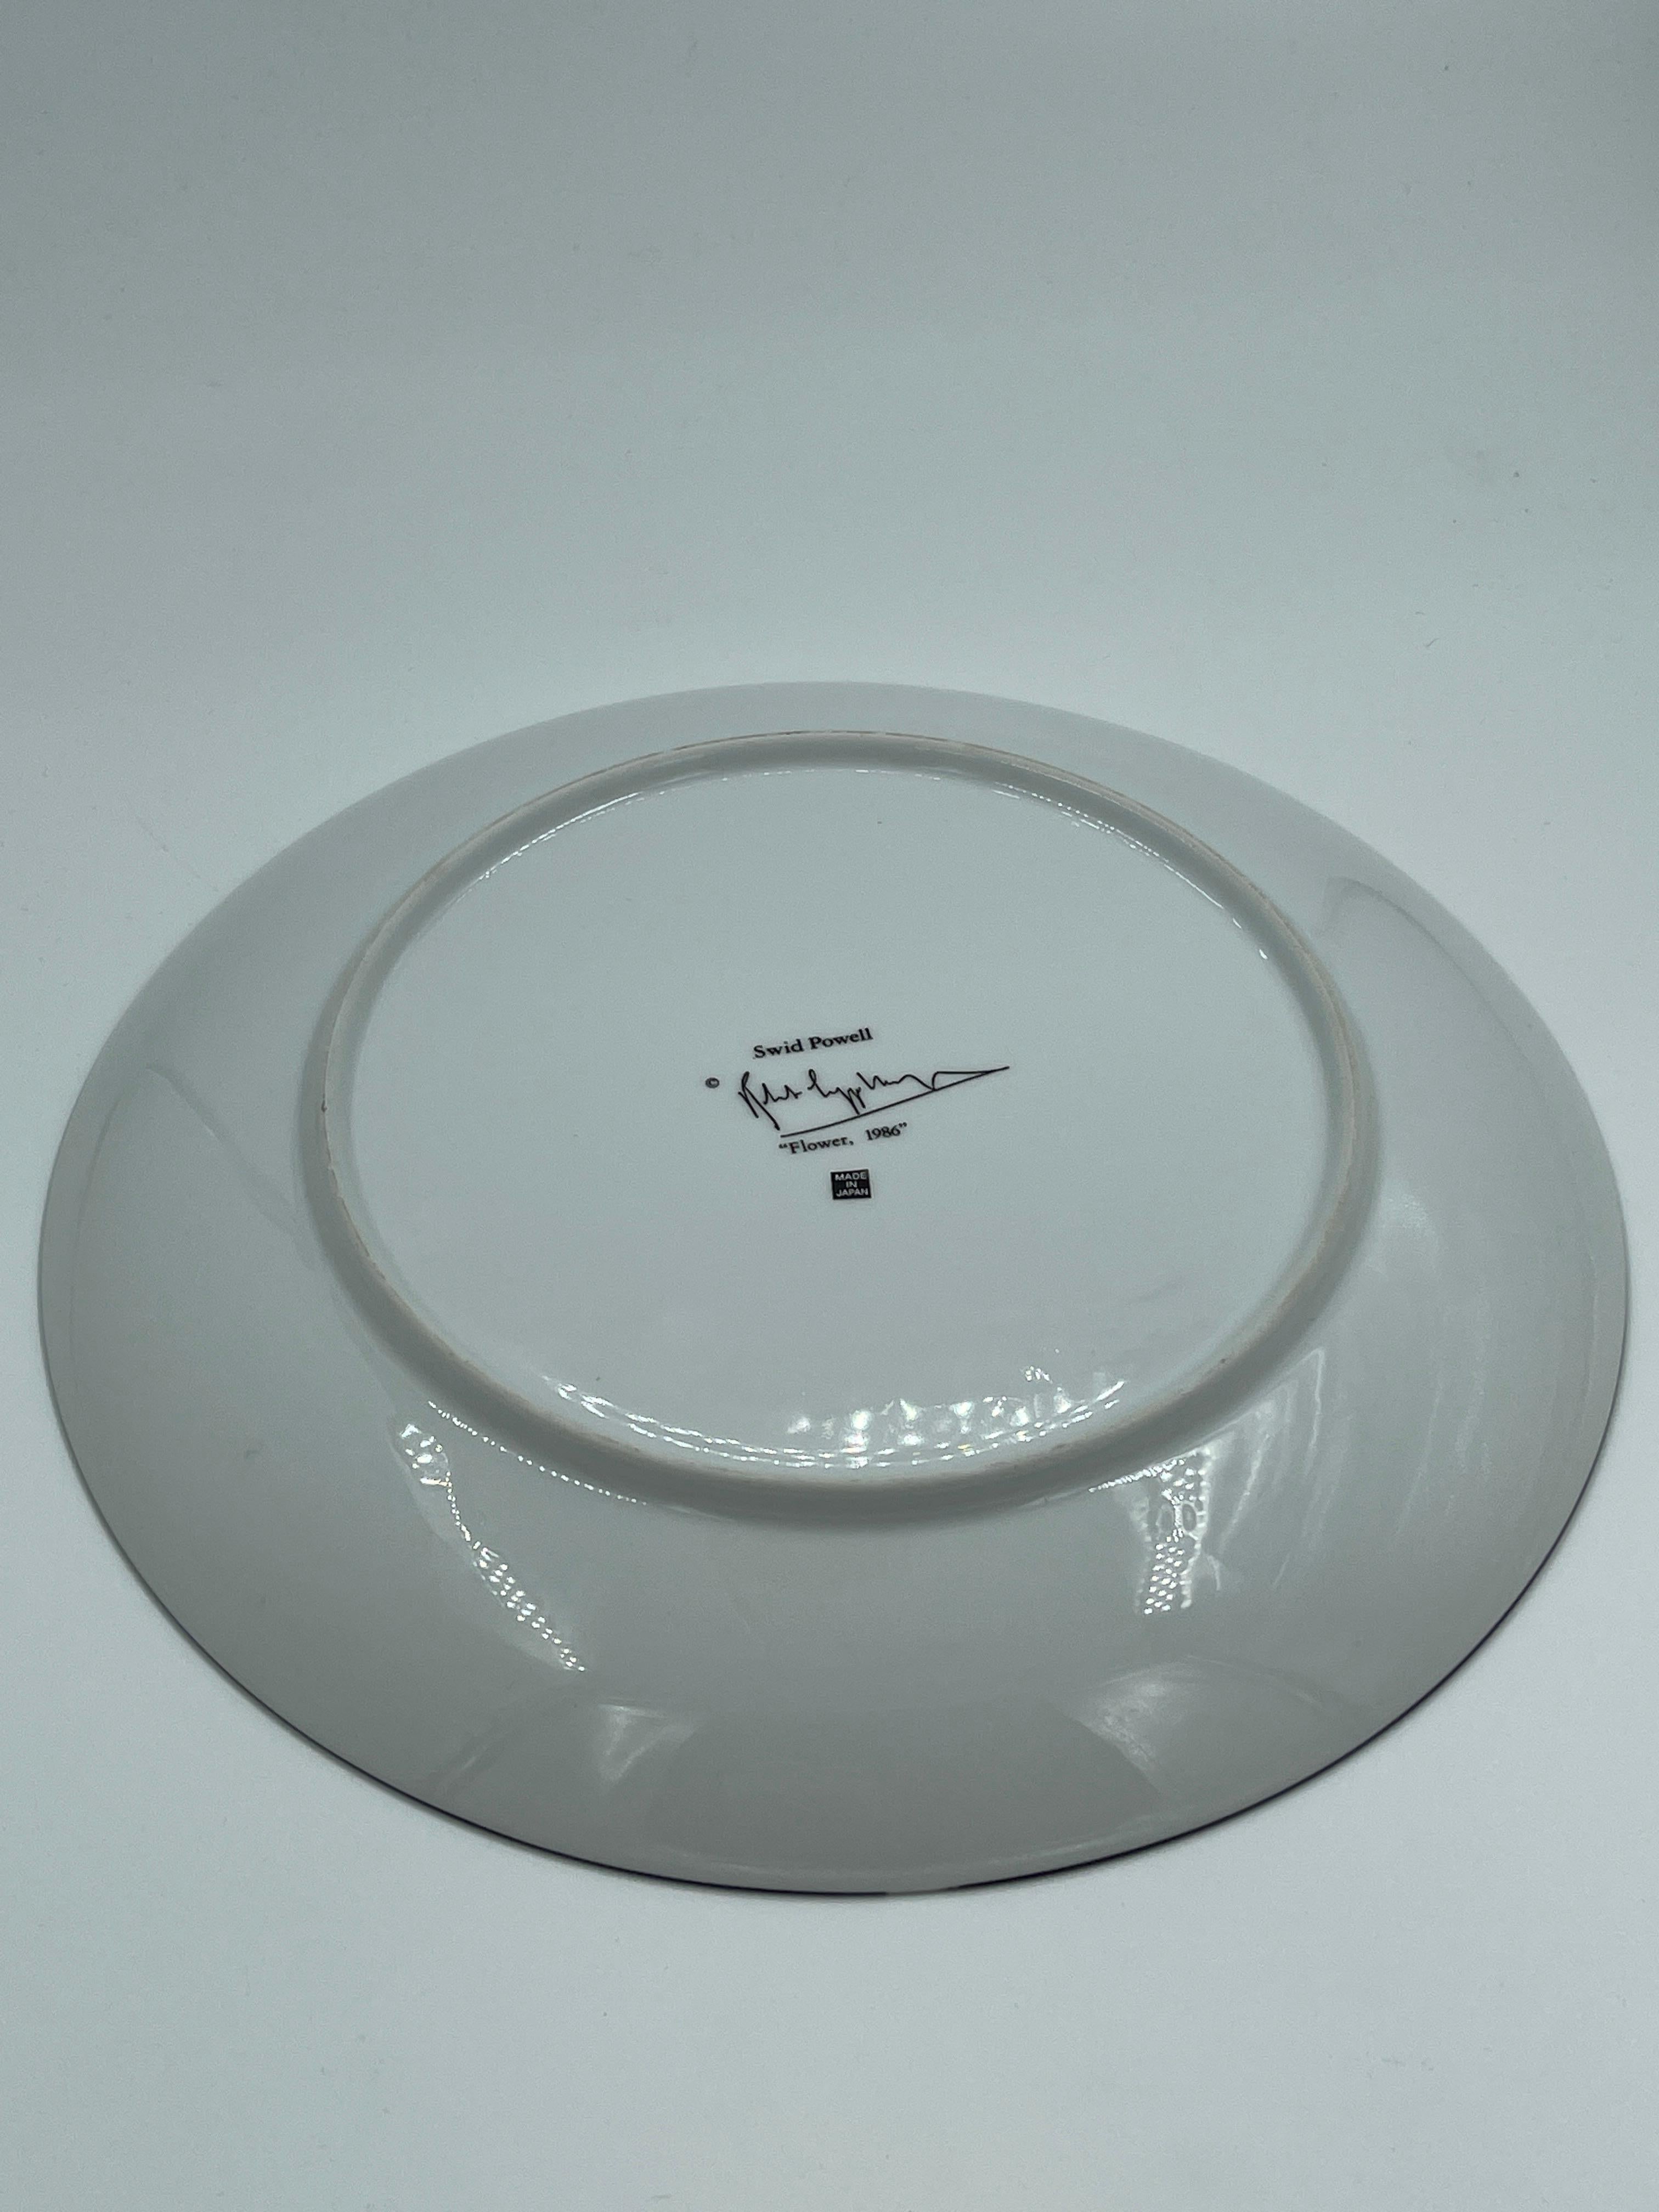 Swid Powell - Robert Mapplethorpe Porcelain Plates, Orchid - Flower - Calla Lily In Excellent Condition For Sale In GRONINGEN, NL